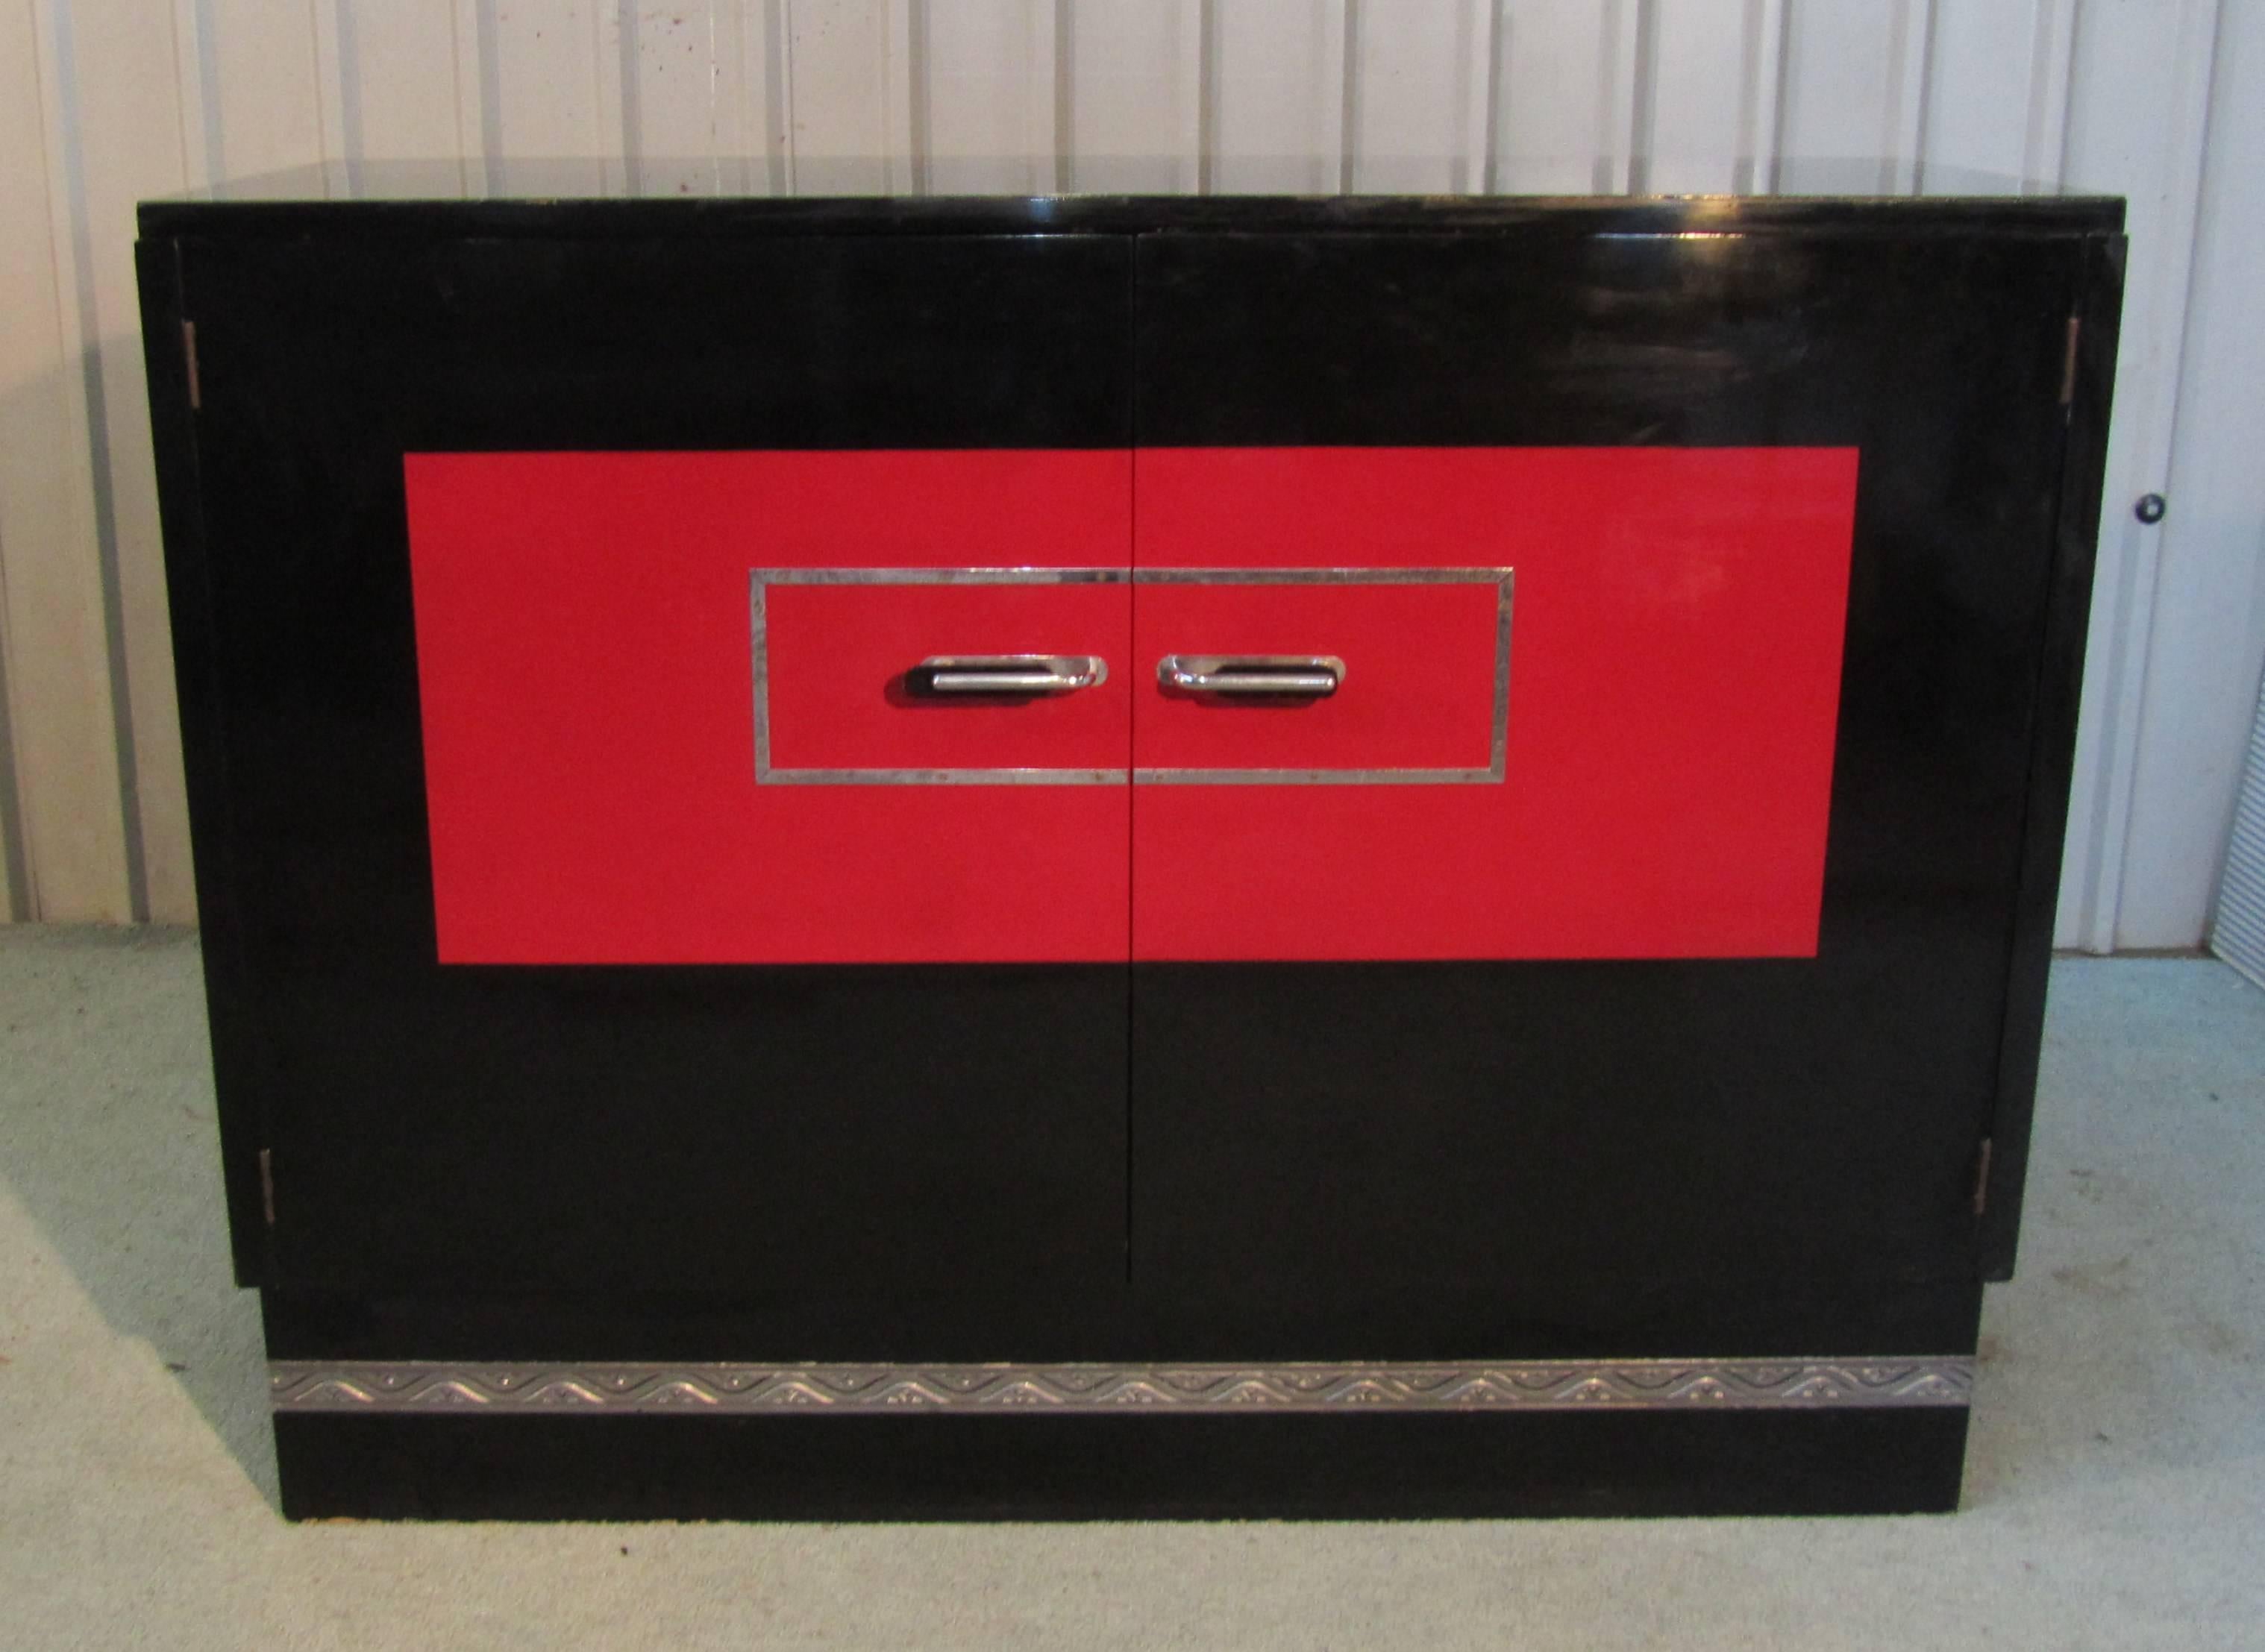 A superb and extremely rare piece, the sideboard is finished in high Gloss Lacquer, all in Black apart from the scarlet panel on the front, this has a chrome decoration and chrome and Bakelite handles 

The Classic design of this piece is